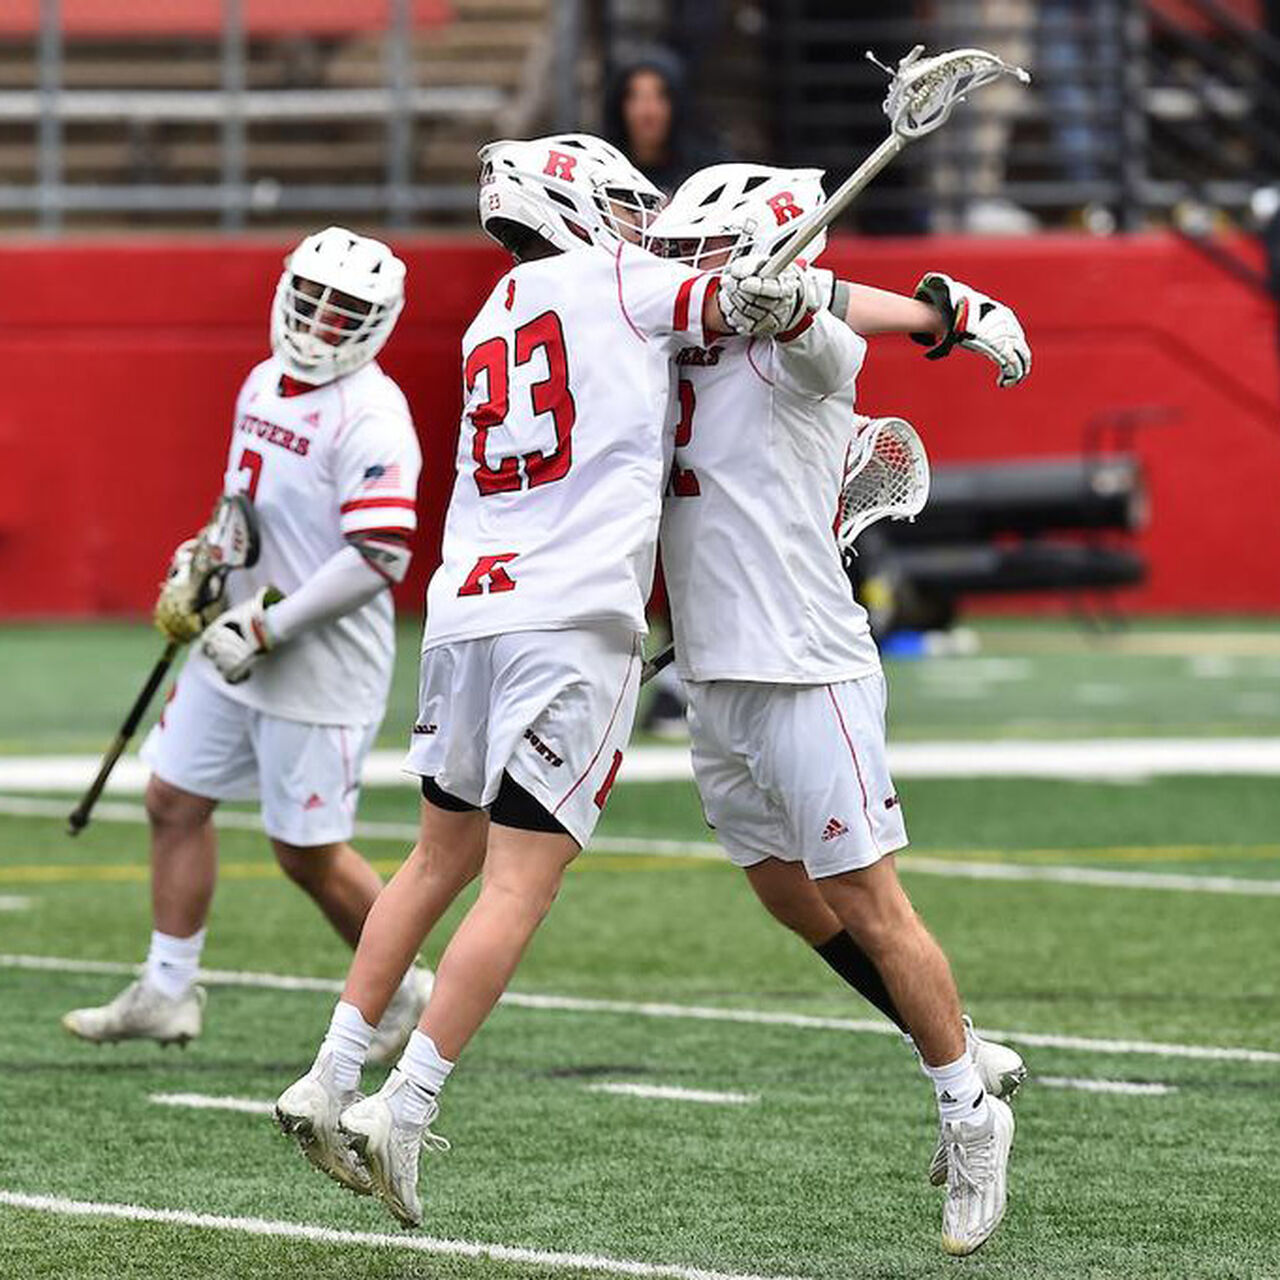 Two Men's Lacrosse players in gear chest bumping on the field image number 0